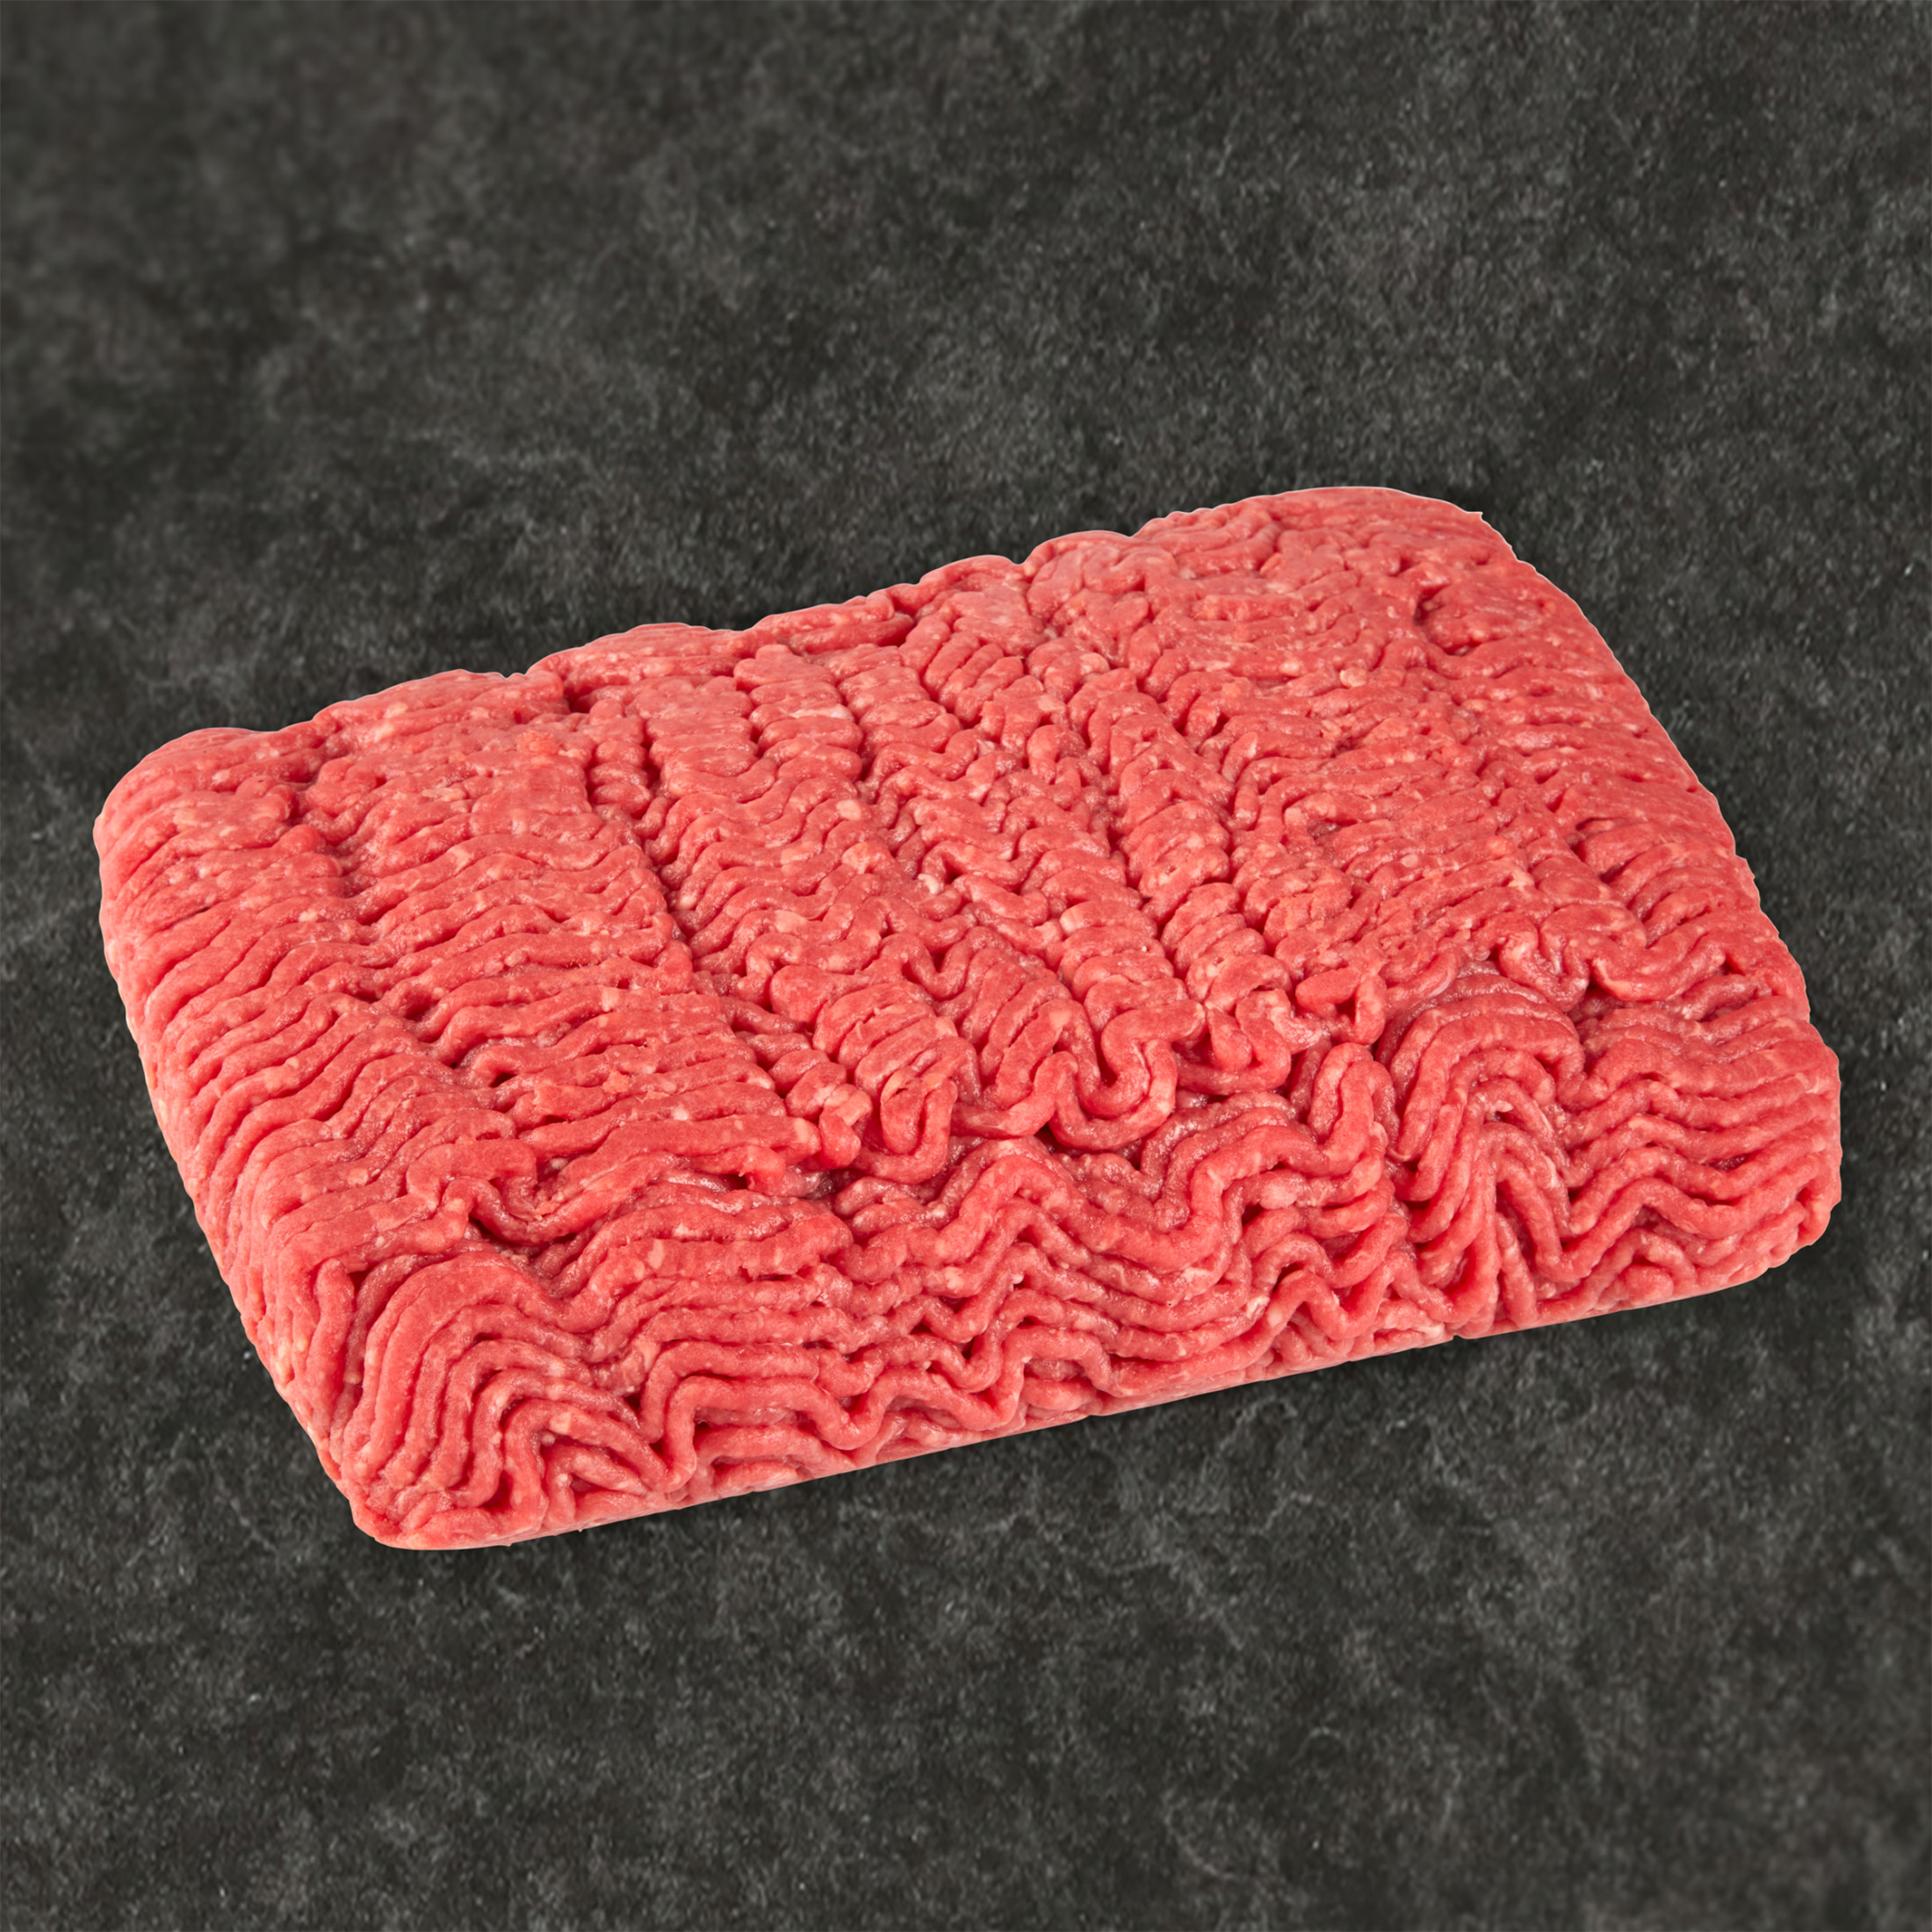 All Natural* 85% Lean/15% Fat Ground Beef Round, 2.25 lb Tray - image 2 of 7